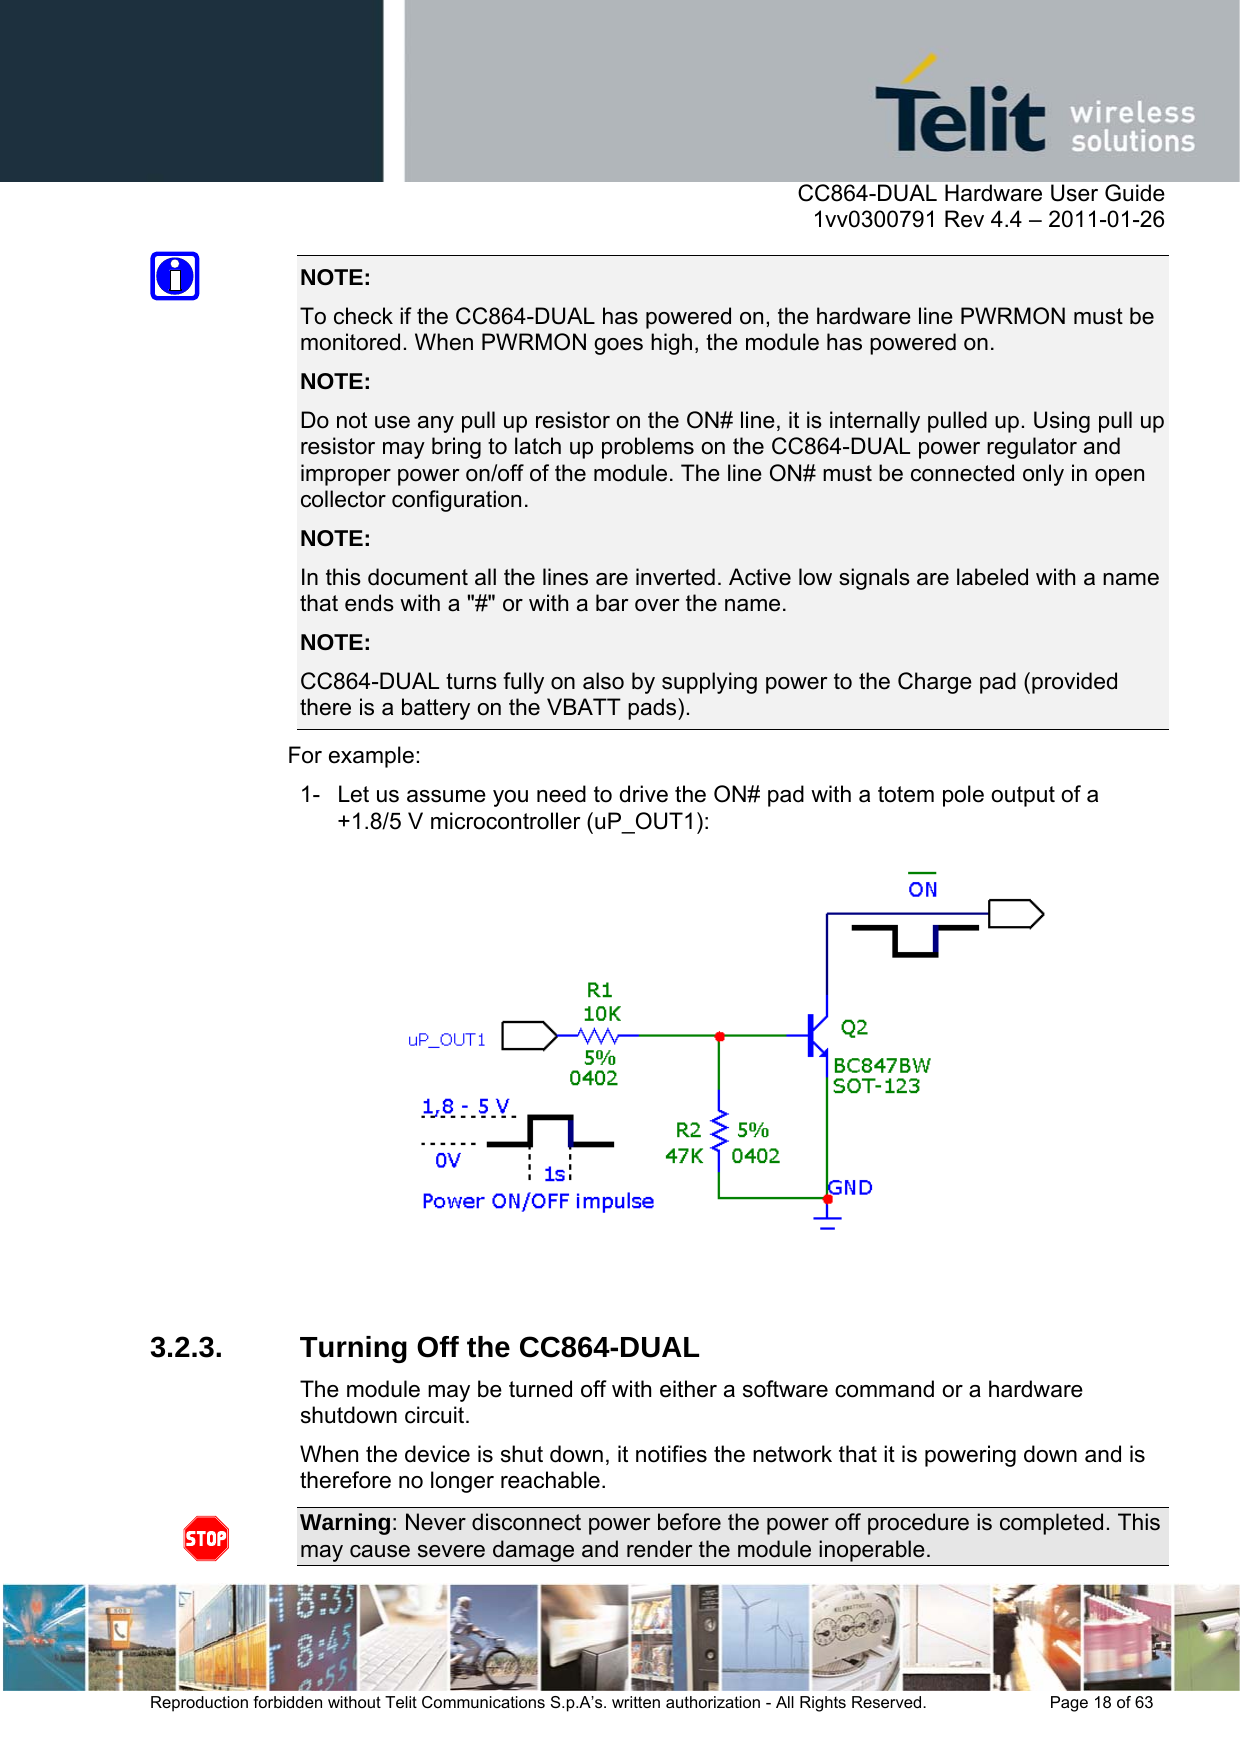      CC864-DUAL Hardware User Guide    1vv0300791 Rev 4.4 – 2011-01-26  Reproduction forbidden without Telit Communications S.p.A’s. written authorization - All Rights Reserved.    Page 18 of 63  NOTE:  To check if the CC864-DUAL has powered on, the hardware line PWRMON must be monitored. When PWRMON goes high, the module has powered on. NOTE:  Do not use any pull up resistor on the ON# line, it is internally pulled up. Using pull up resistor may bring to latch up problems on the CC864-DUAL power regulator and improper power on/off of the module. The line ON# must be connected only in open collector configuration. NOTE:  In this document all the lines are inverted. Active low signals are labeled with a name that ends with a &quot;#&quot; or with a bar over the name. NOTE:  CC864-DUAL turns fully on also by supplying power to the Charge pad (provided there is a battery on the VBATT pads). For example: 1-  Let us assume you need to drive the ON# pad with a totem pole output of a +1.8/5 V microcontroller (uP_OUT1):   3.2.3.  Turning Off the CC864-DUAL The module may be turned off with either a software command or a hardware shutdown circuit. When the device is shut down, it notifies the network that it is powering down and is therefore no longer reachable.  Warning: Never disconnect power before the power off procedure is completed. This may cause severe damage and render the module inoperable.  